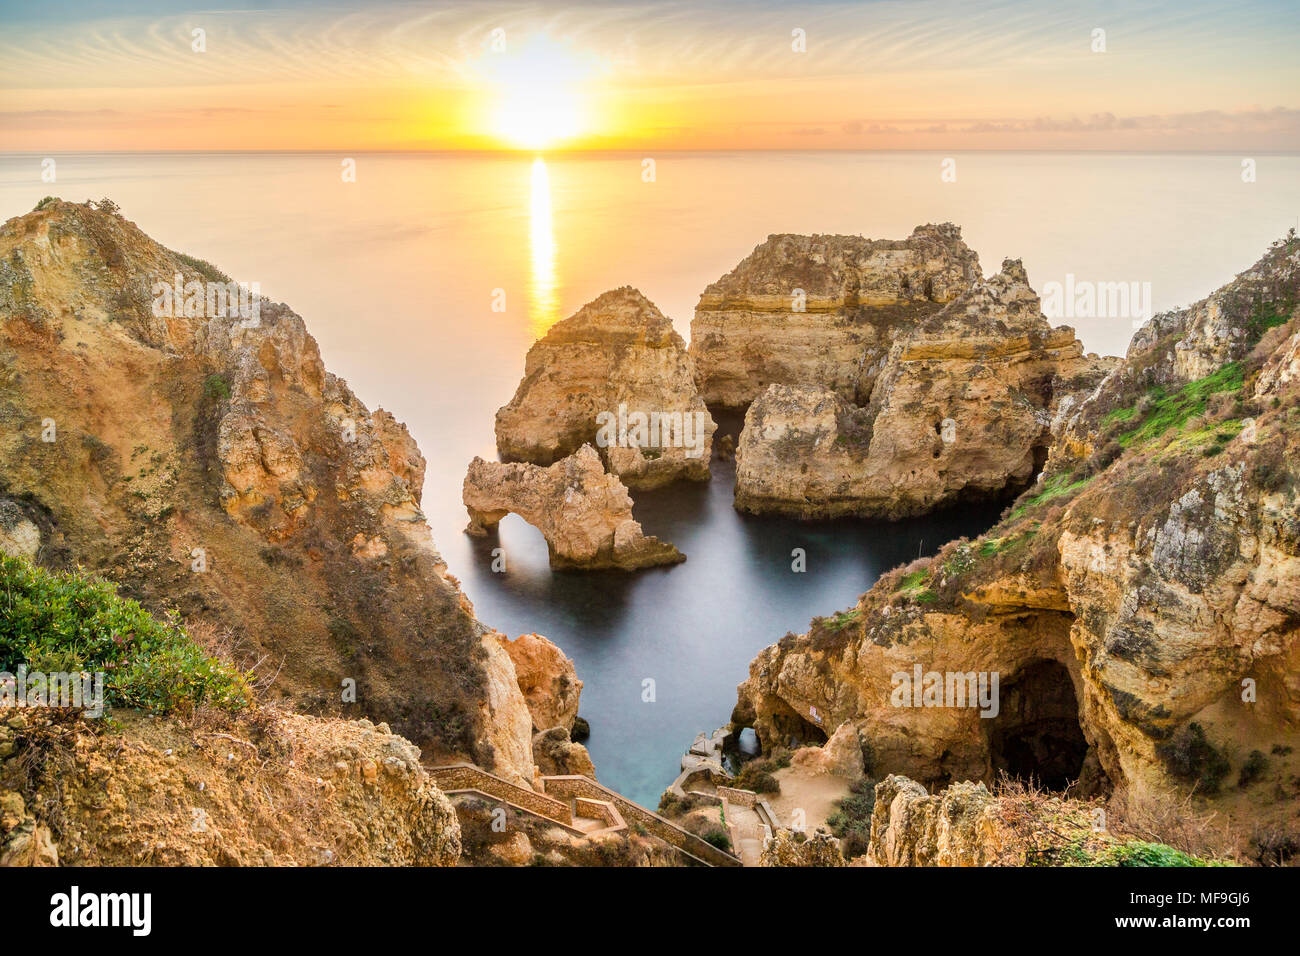 Stunning cliffs and arches in Ponta da Piedade in the early morning, Lagos, Algarve, Portugal Stock Photo